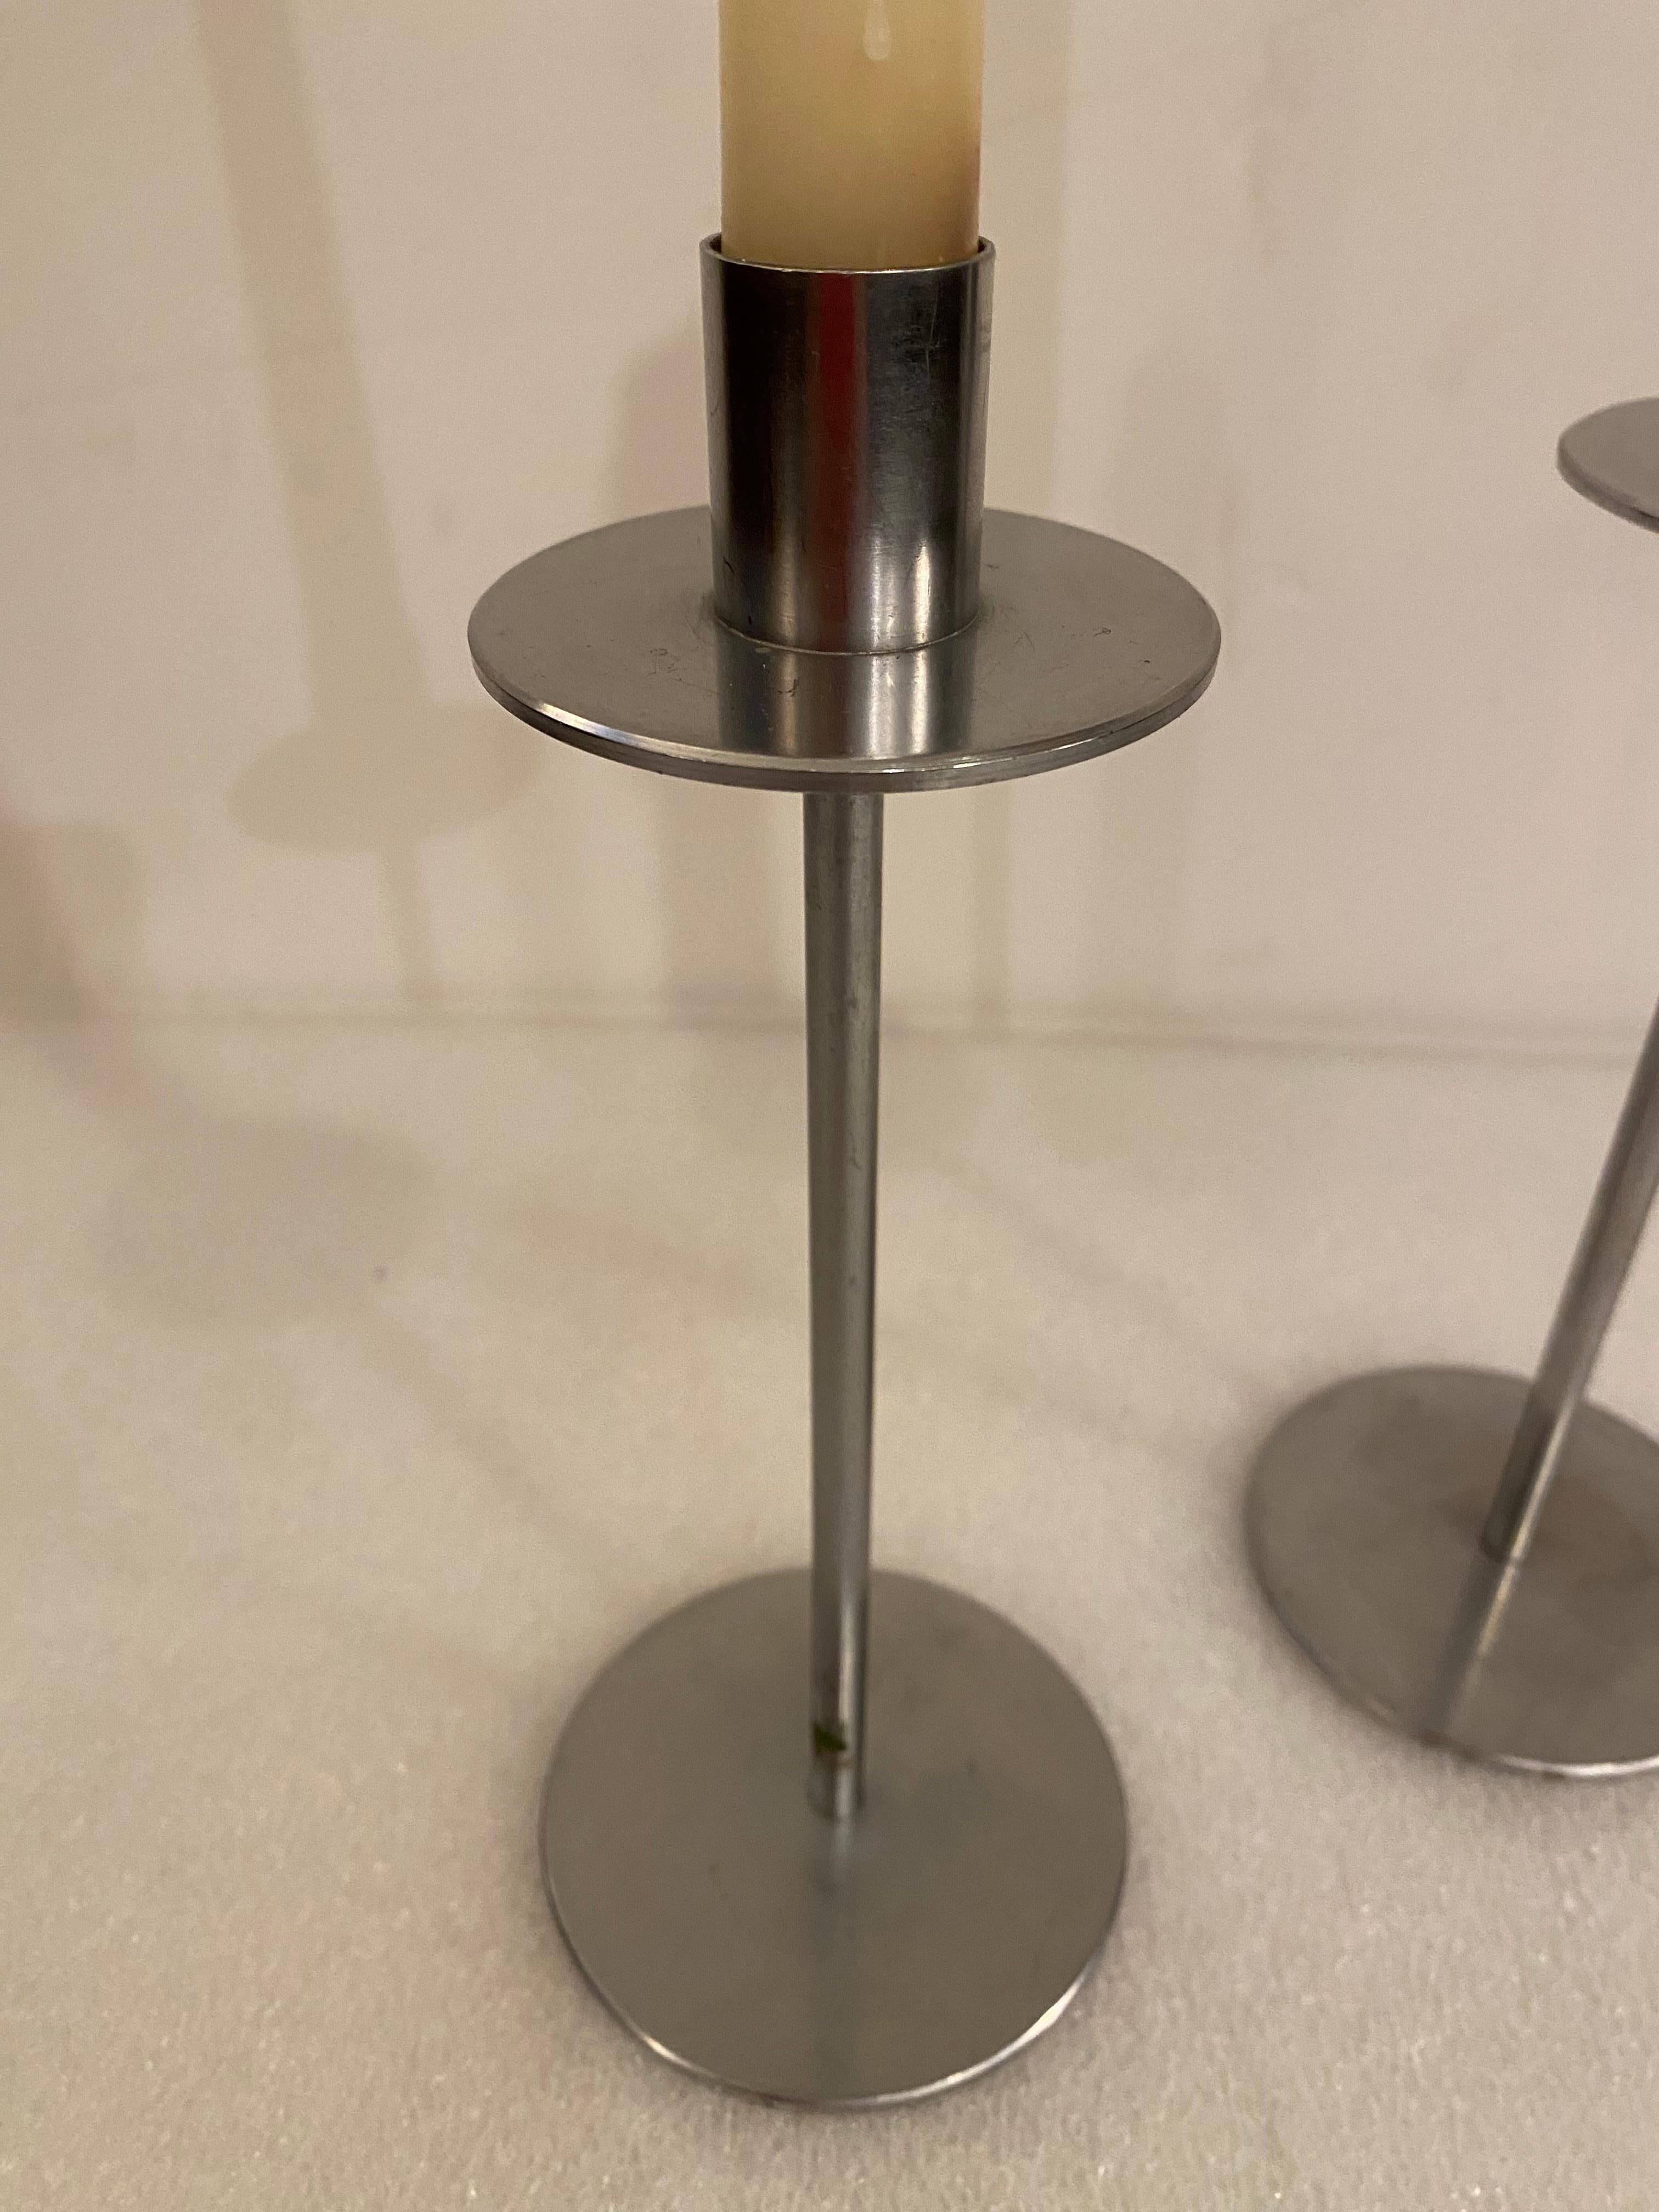 Pair of Italian Chrome Candlesticks probably dating to the 1960's.  Have an Sottsass Feel to them.  Marked Italy on bottom